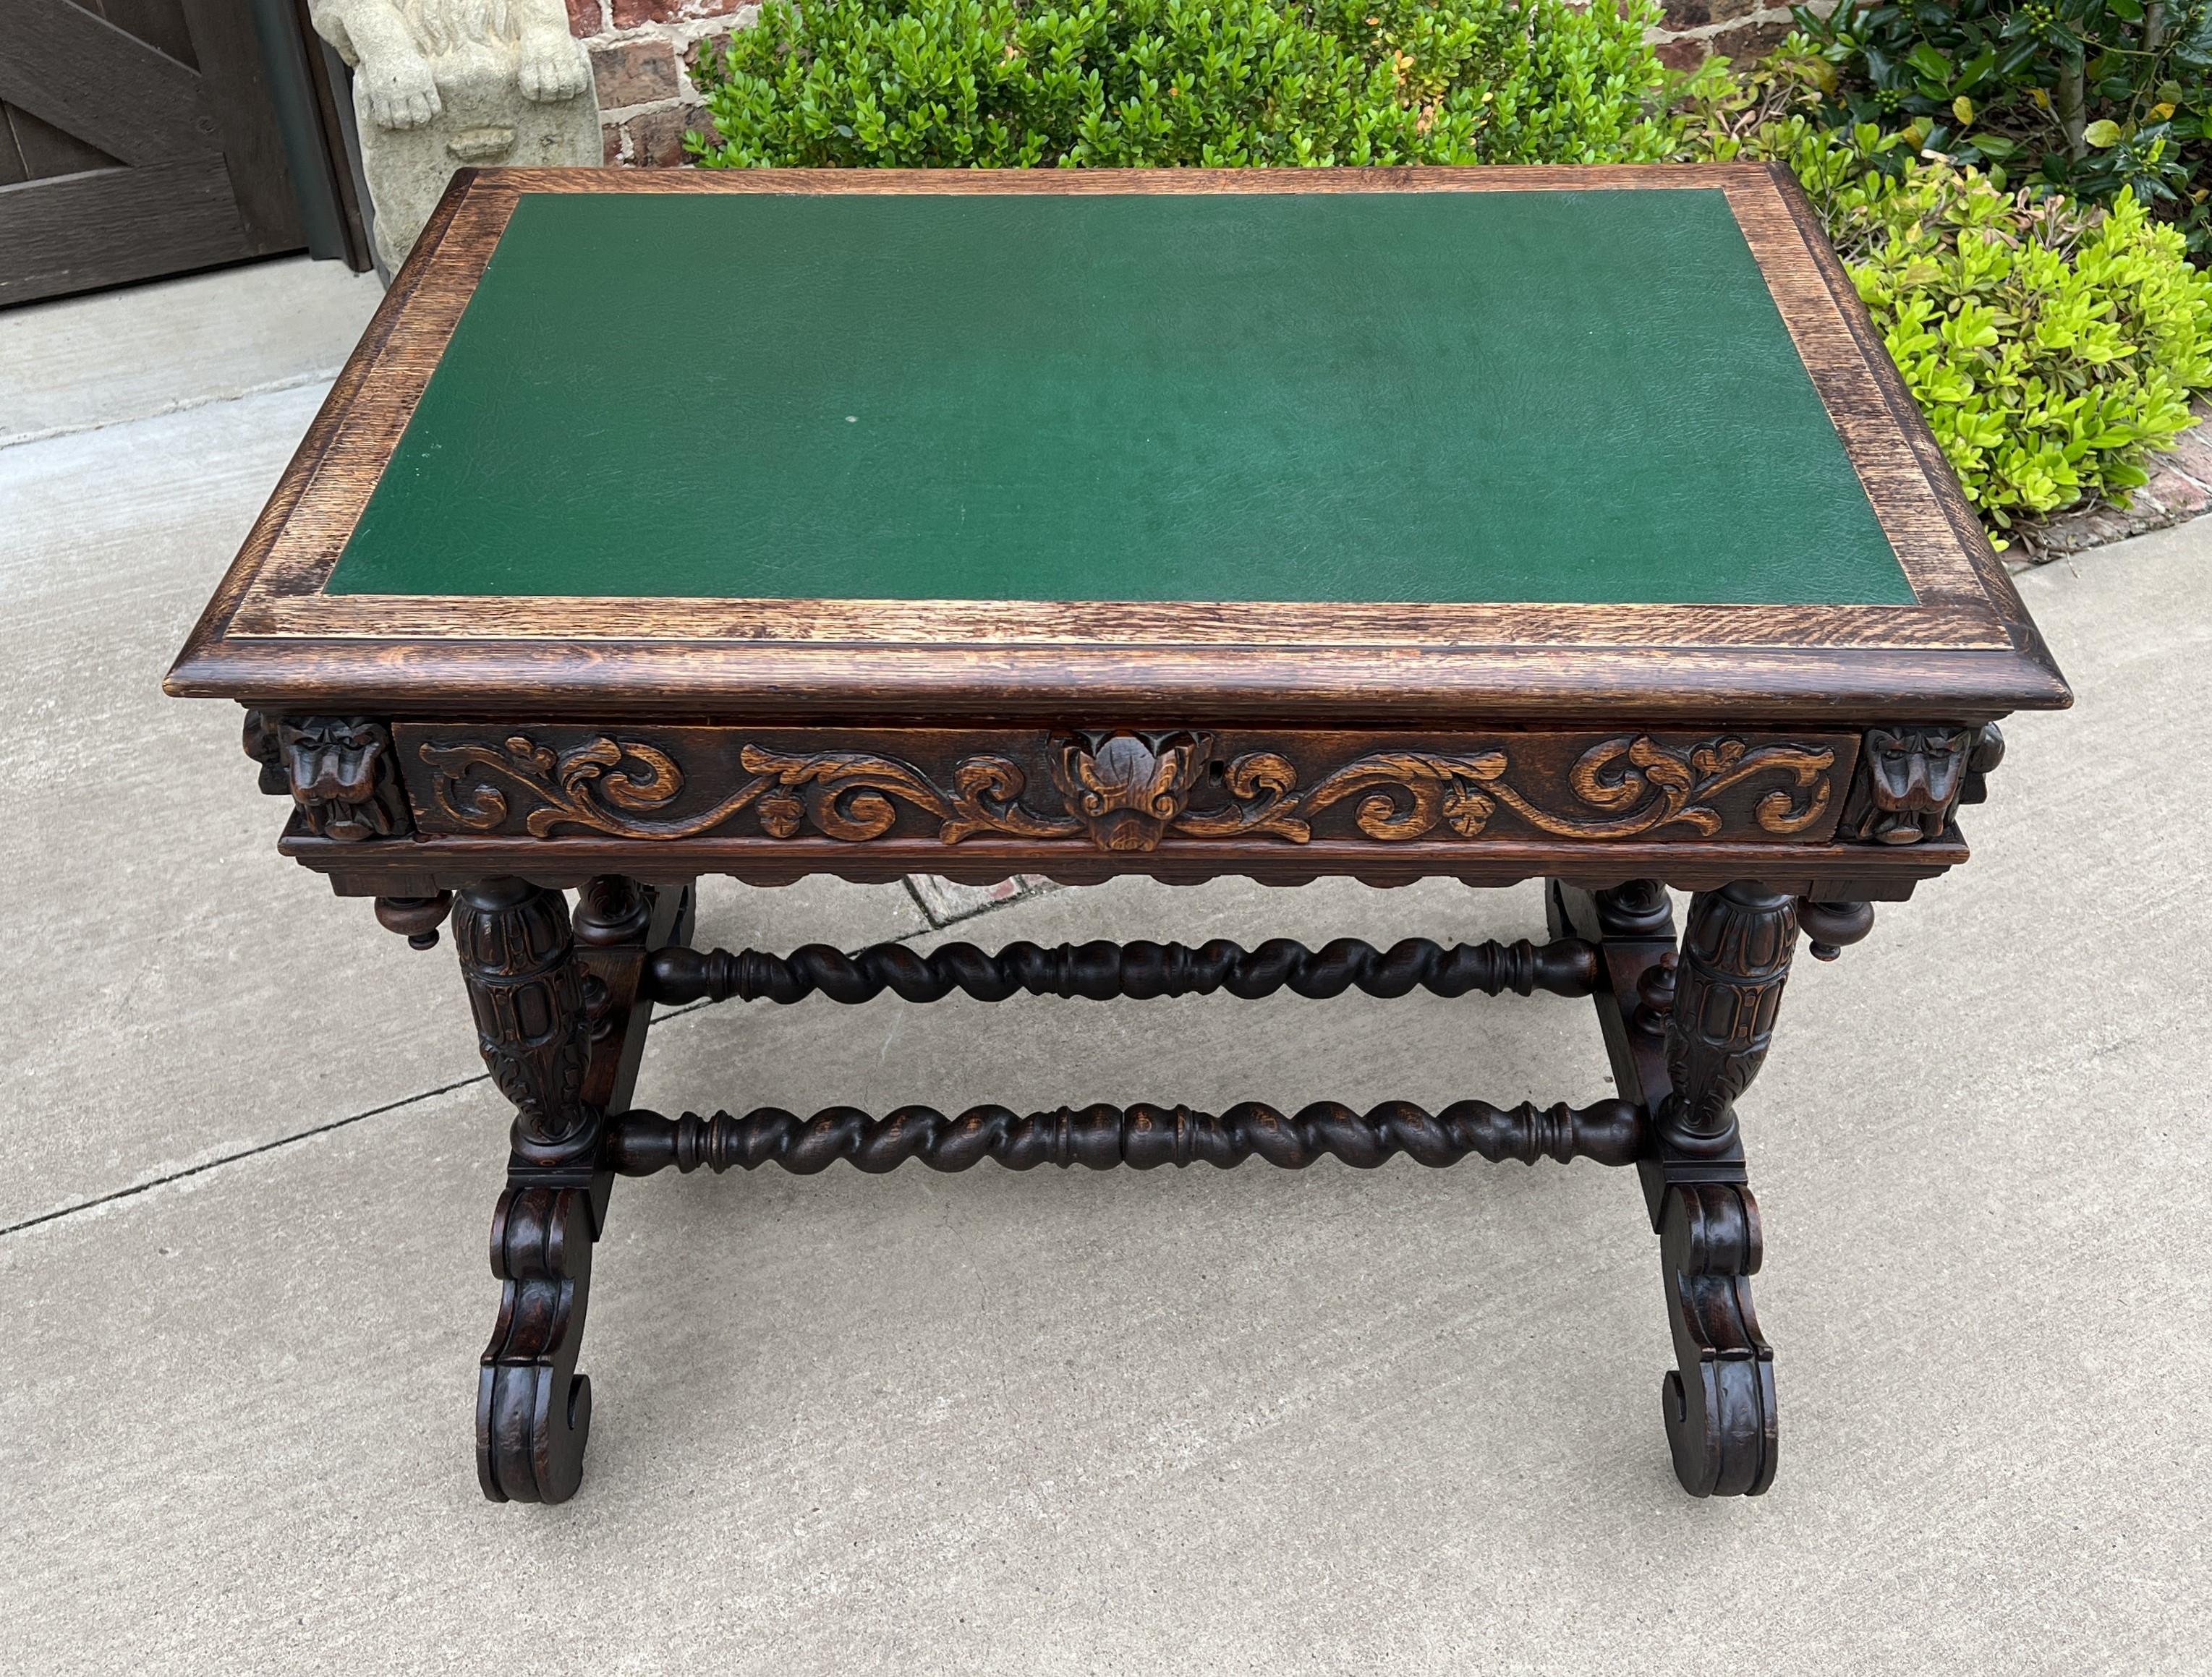 Antique English Desk Table with Drawer Oak Leather Top Barley Twist Petite In Good Condition For Sale In Tyler, TX